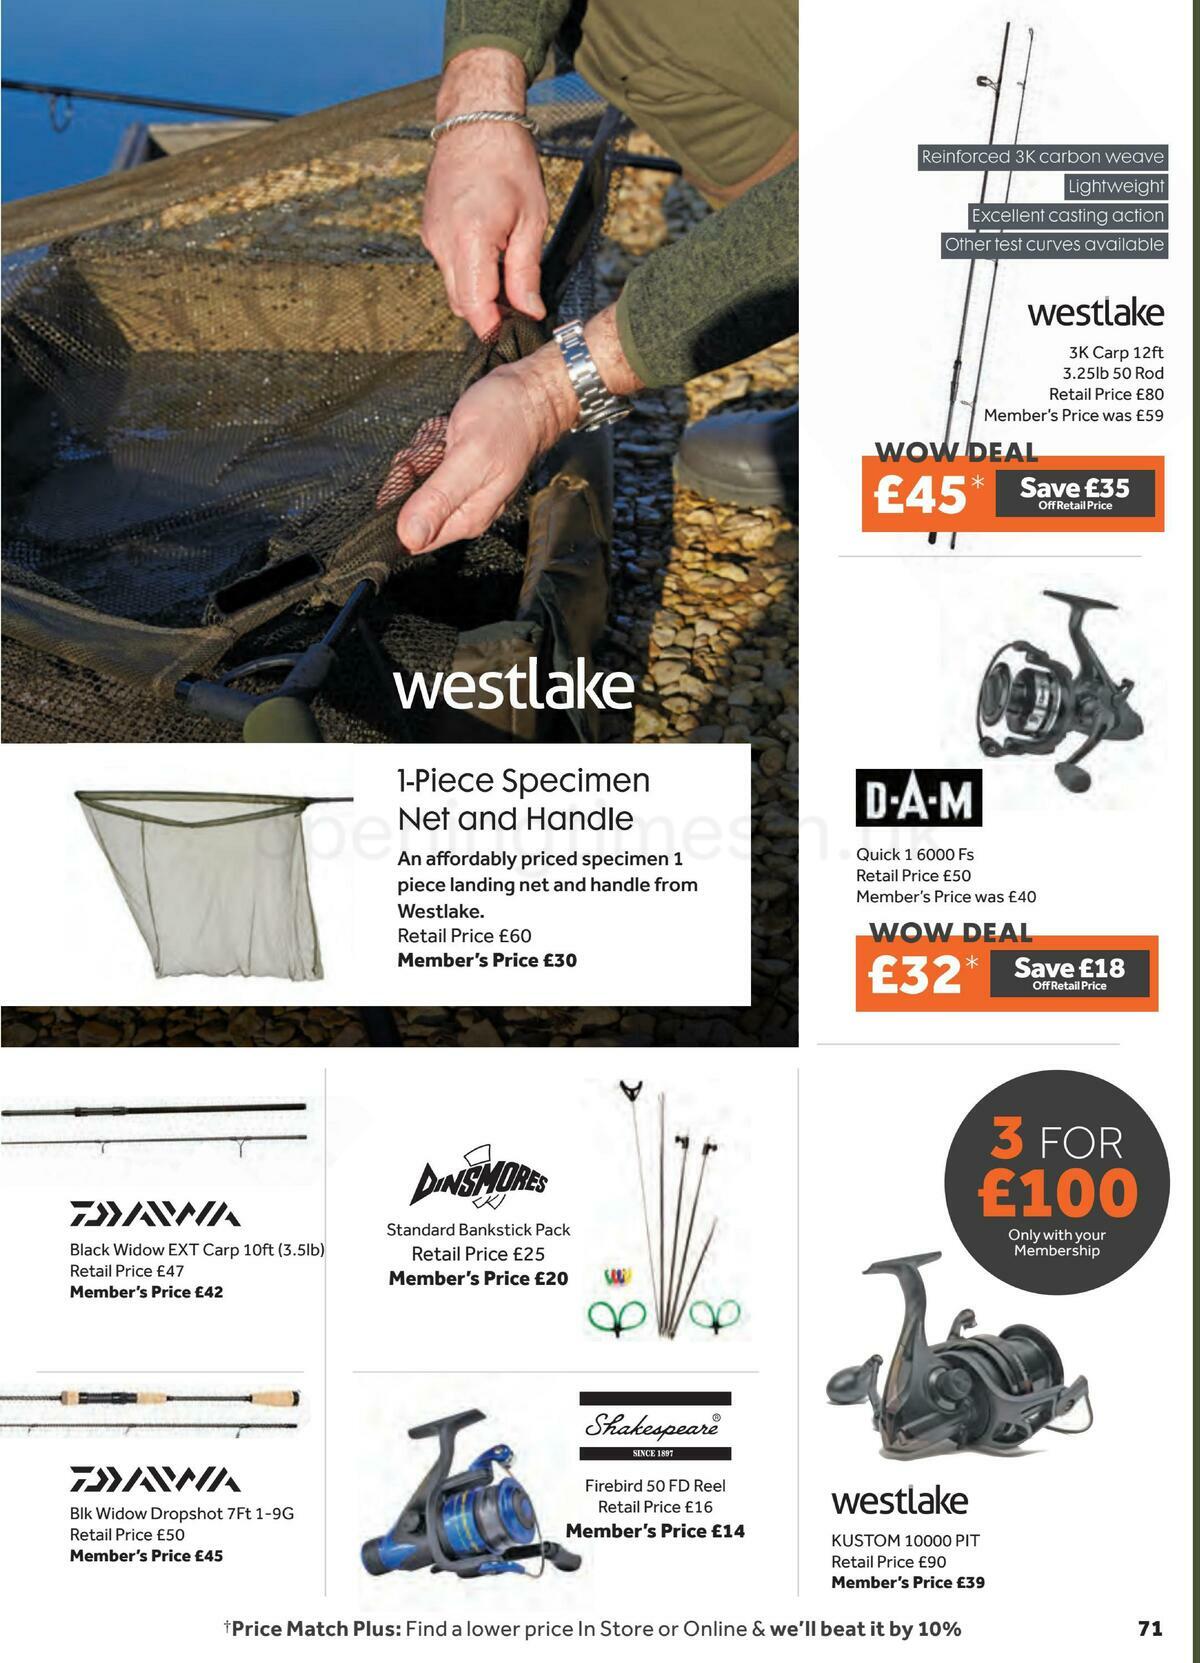 GO Outdoors Offers from 16 May